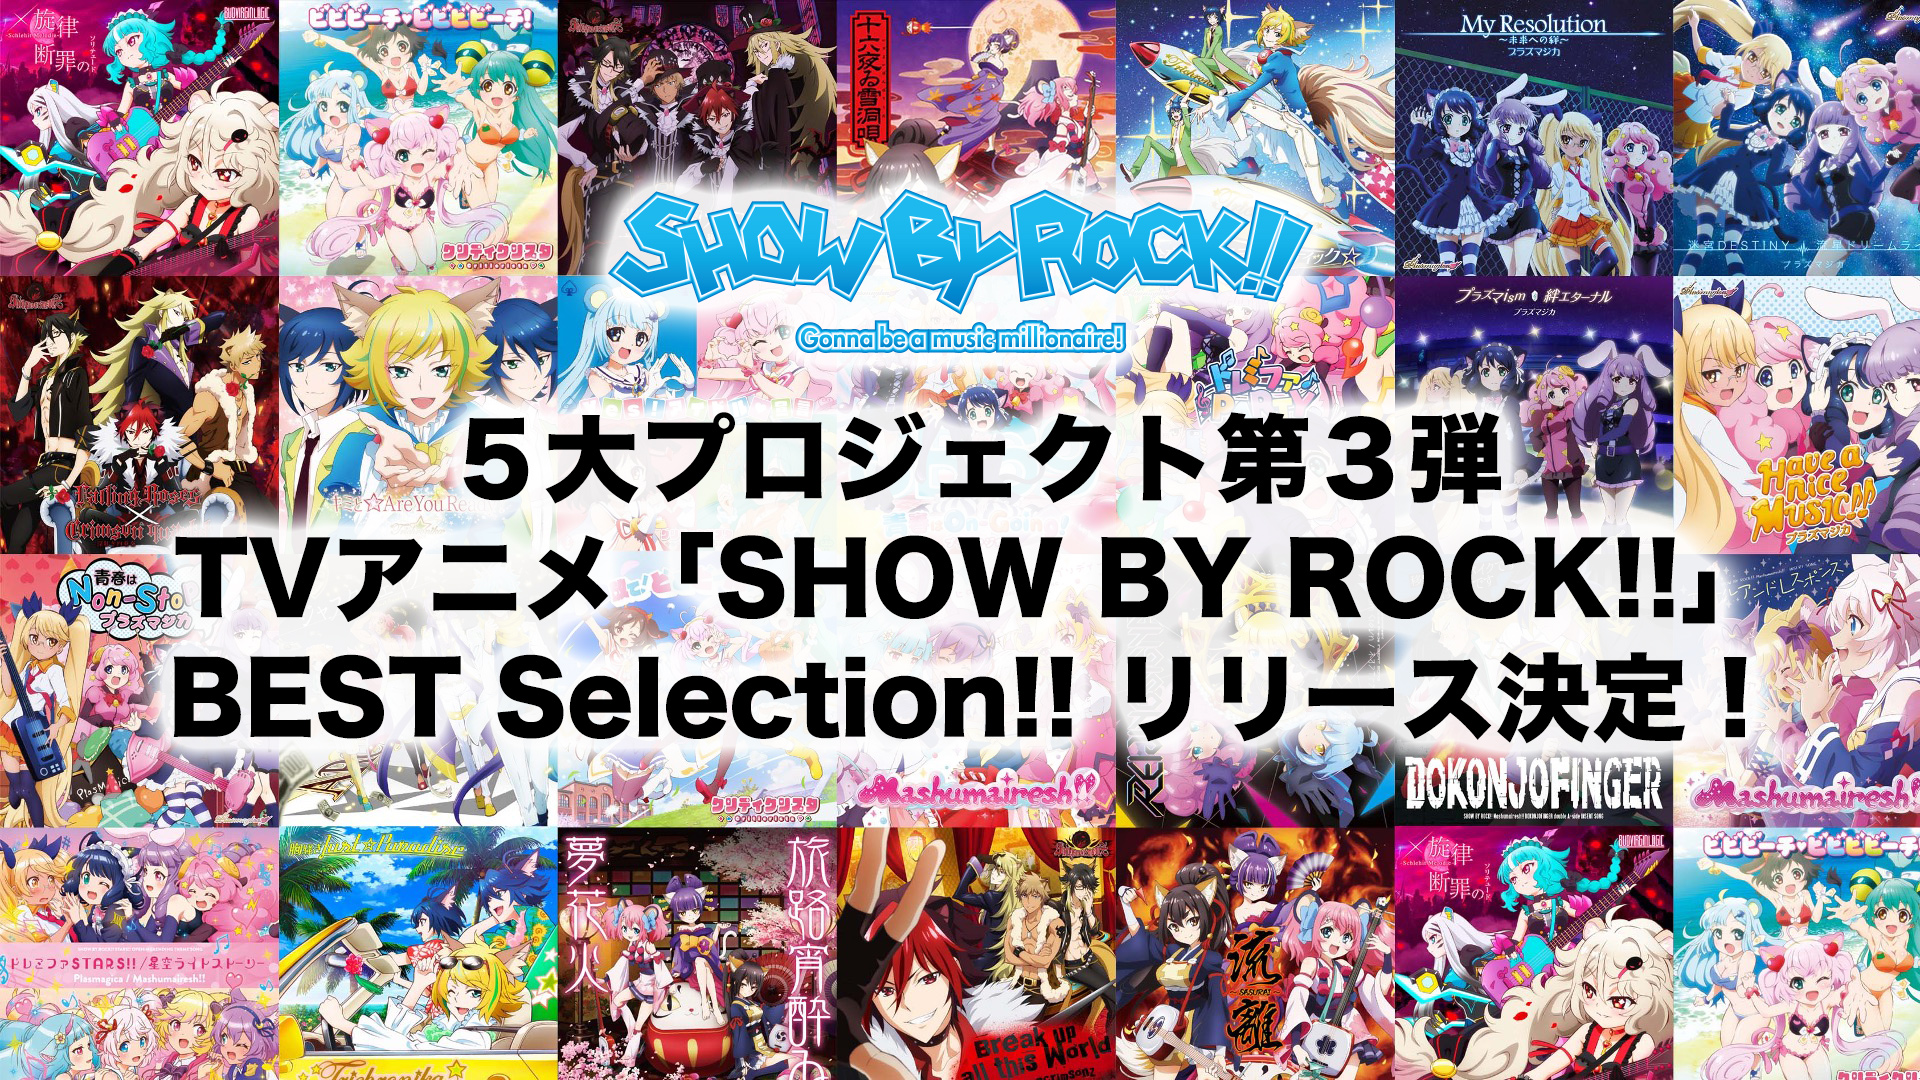  Show By Rock!! Mashumairesh!! - The Complete Series